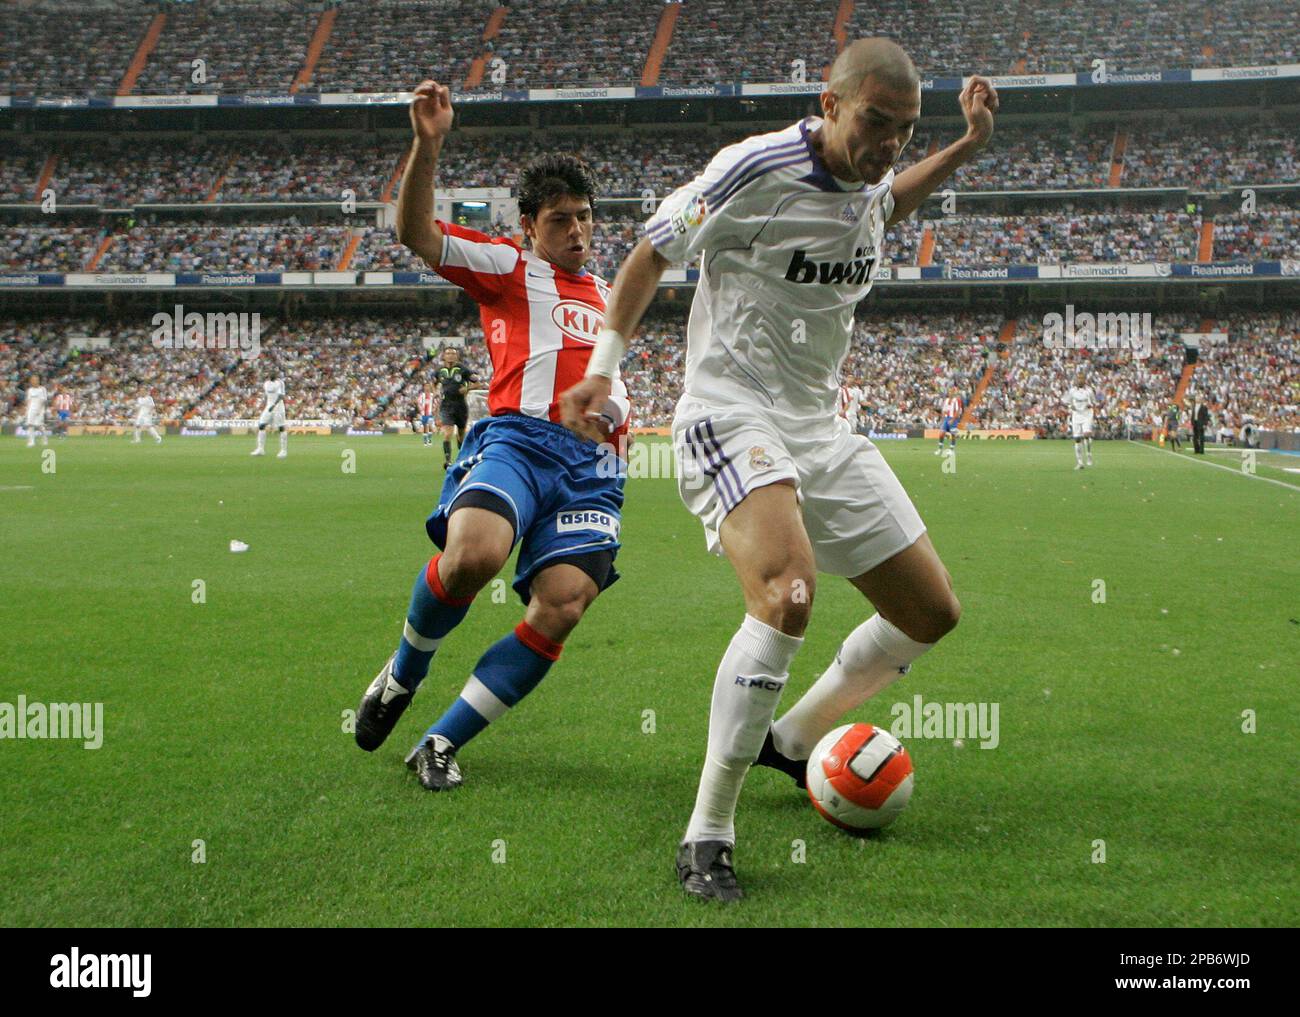 Pepe Lima Of Real Madrid During The Spanish League Match Between